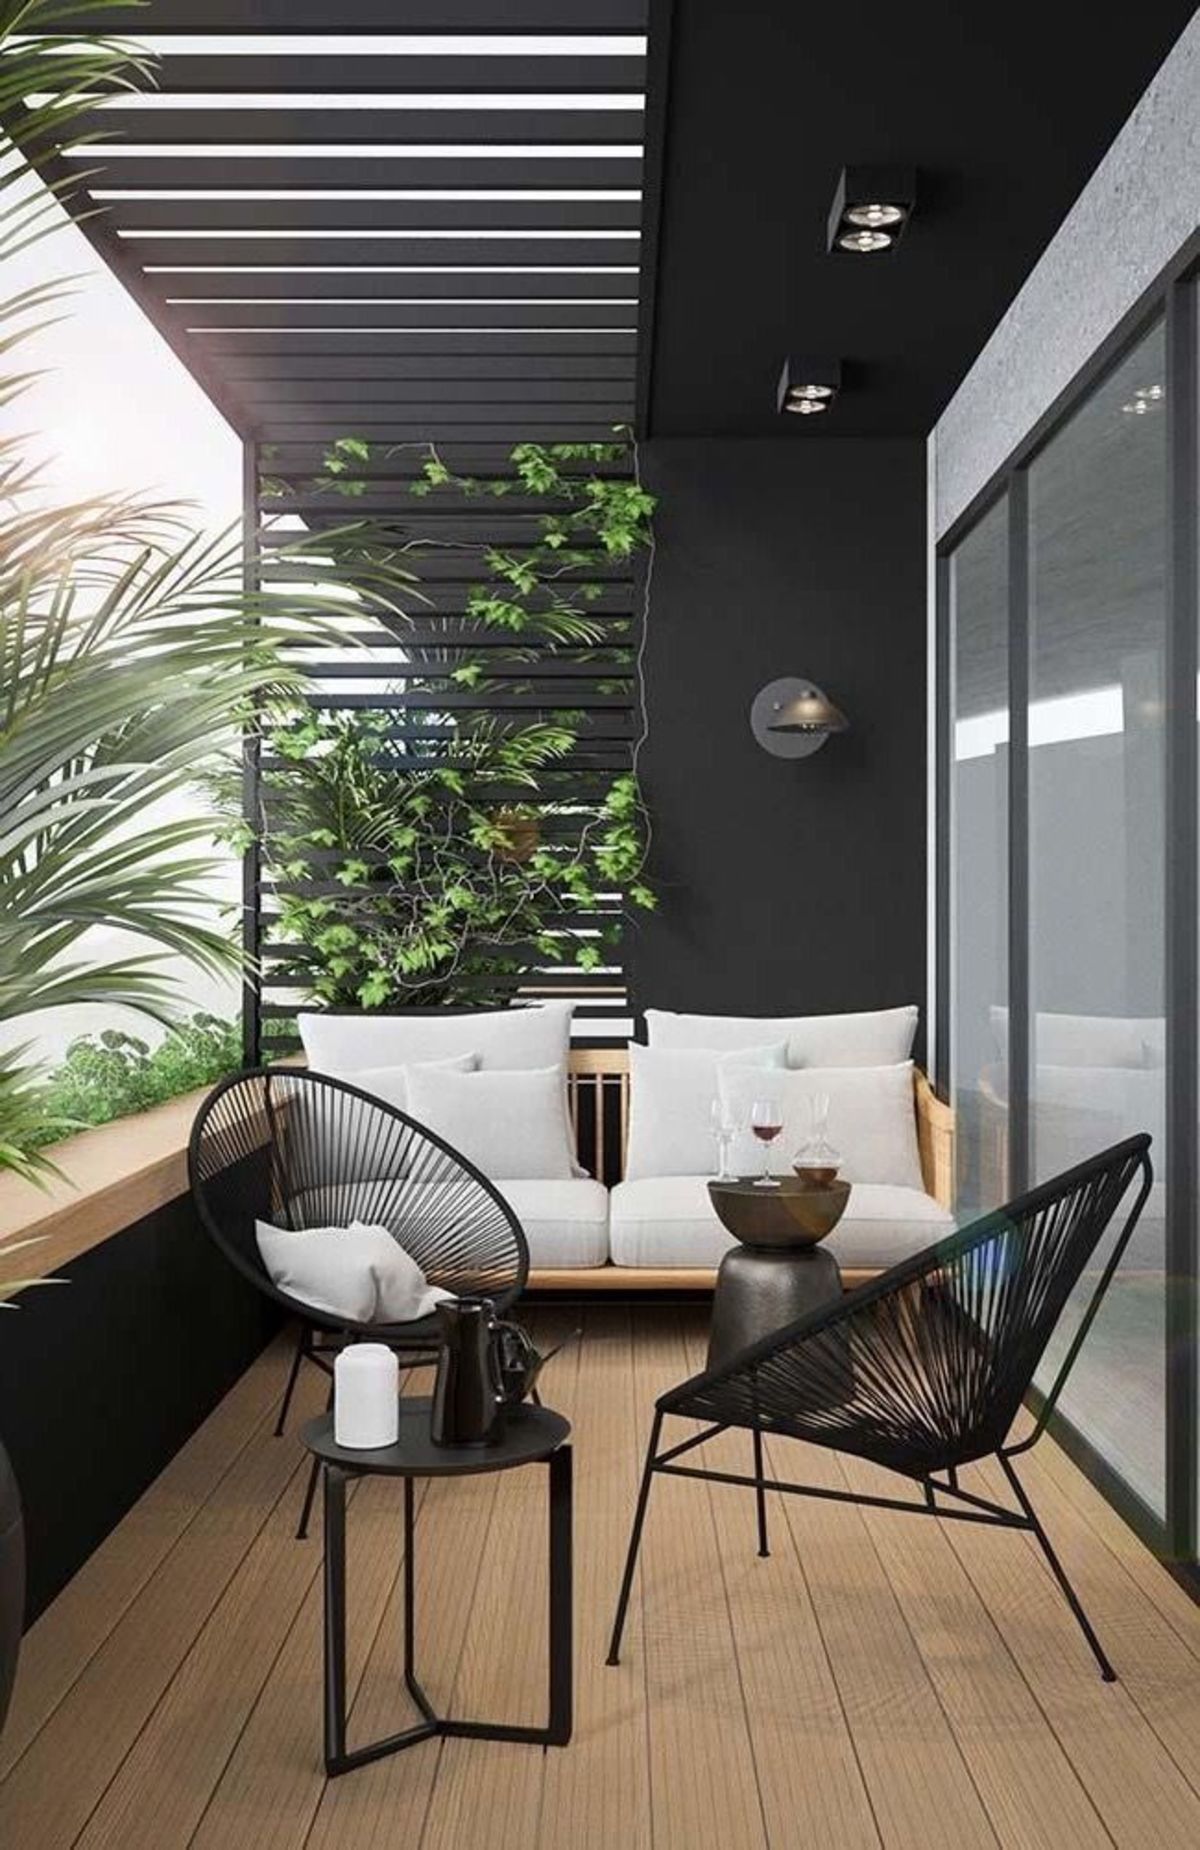 Creative Ways to Design a Compact Outdoor Space